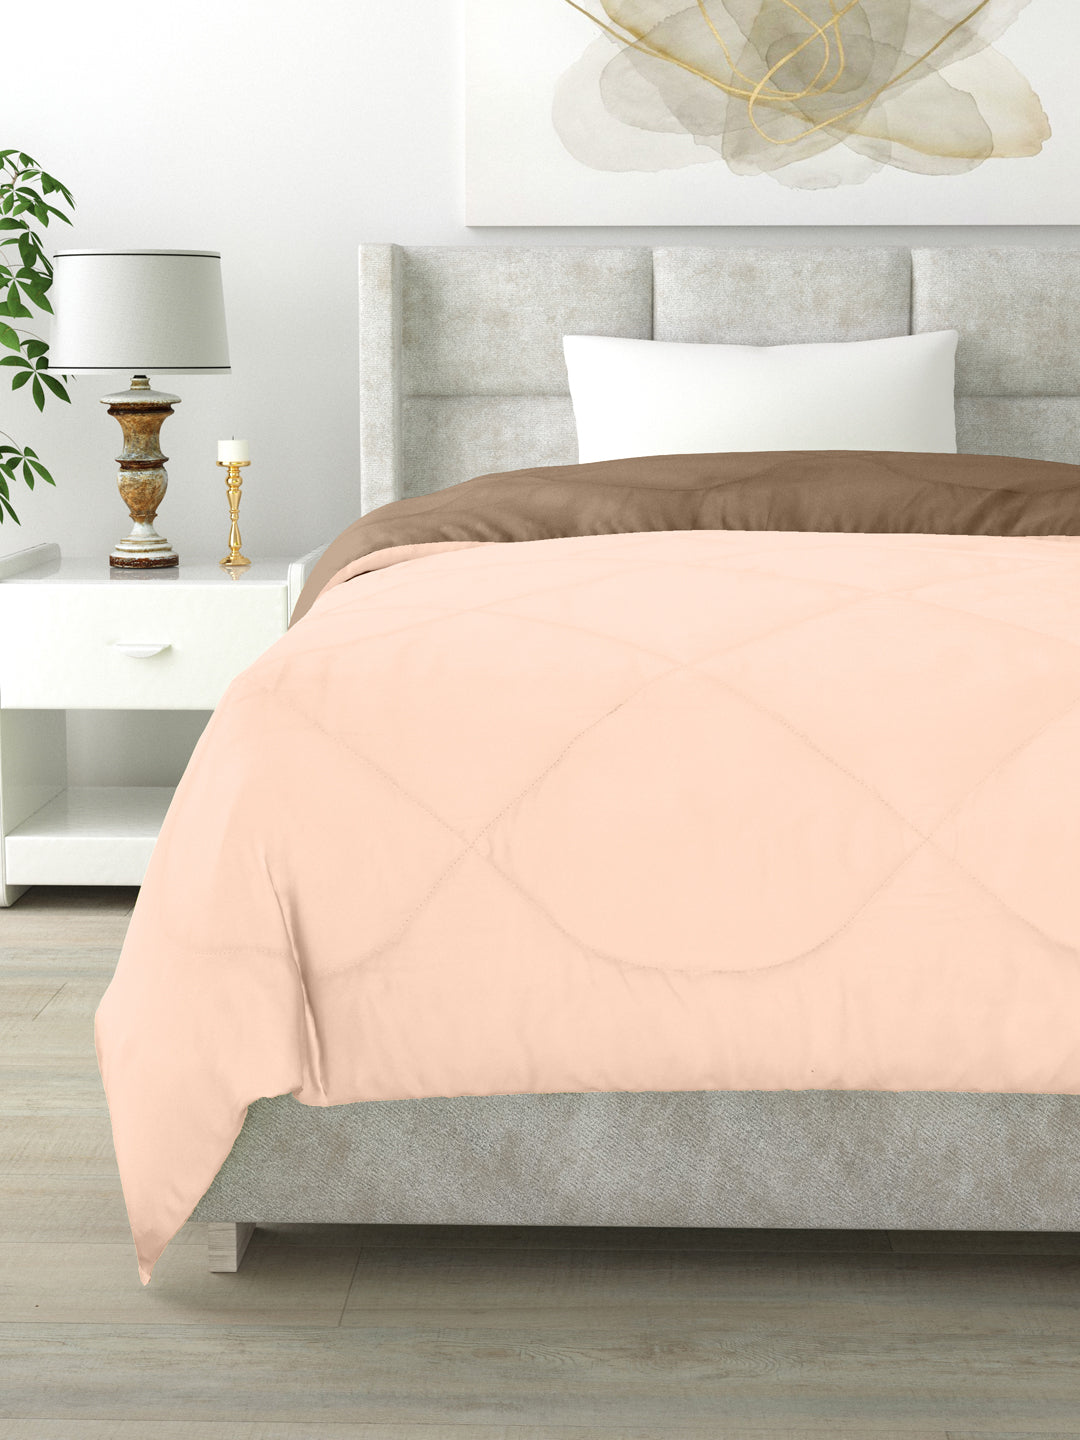 Reversible Single Bed Comforter 200 GSM 60x90 Inches (Taupe & Peach)